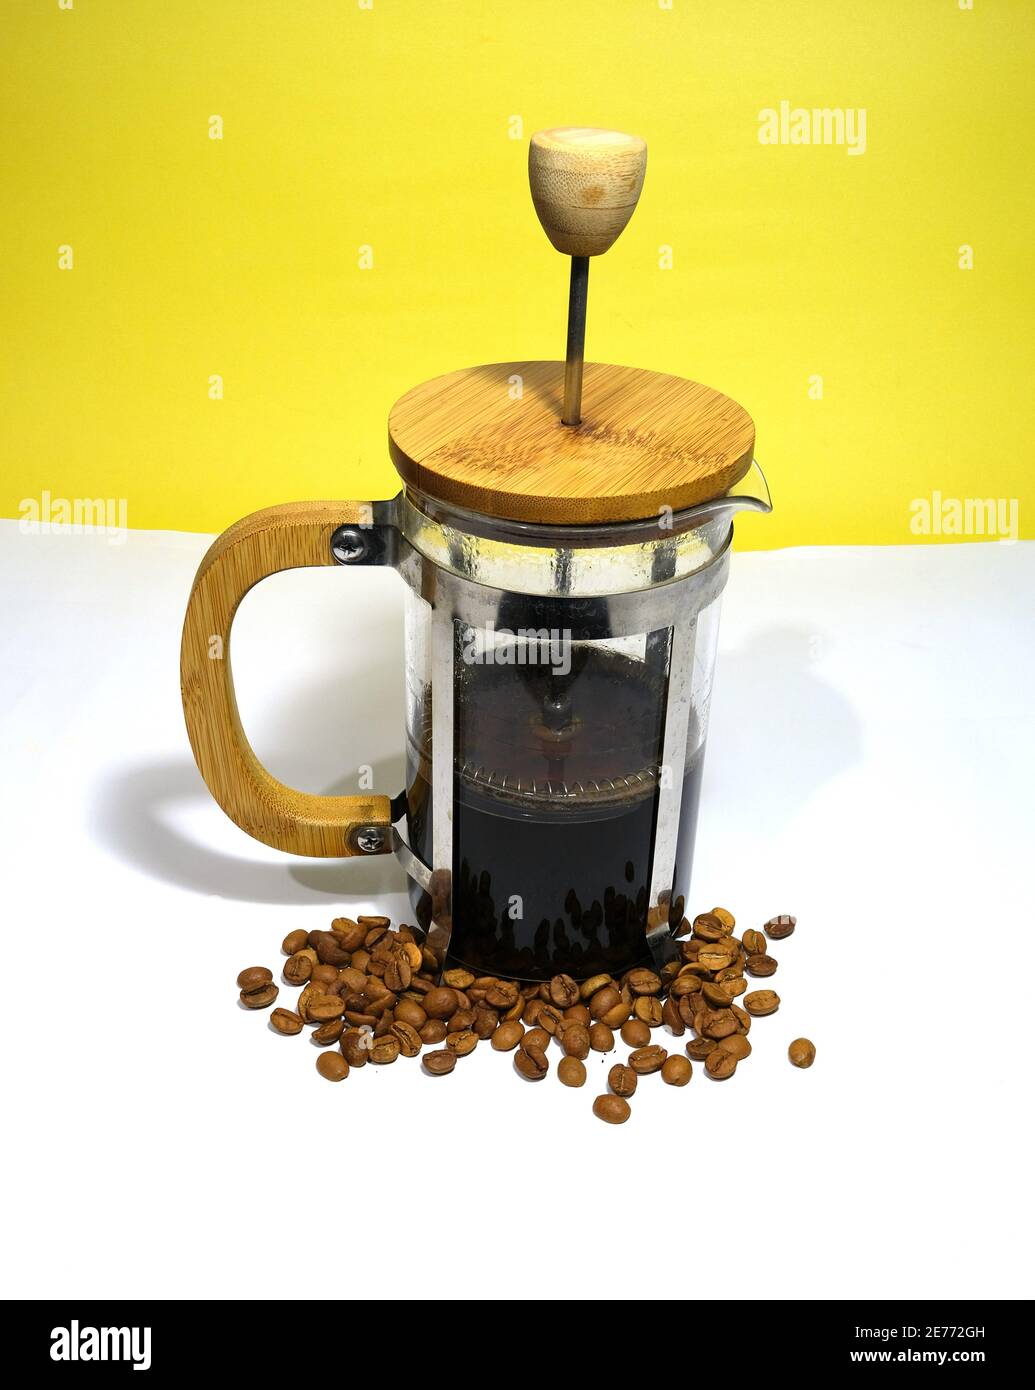 Arabic coffee beans bottom of the french press and cooked caffe inside the  glass side of the press and wooded details with dull yellow background  Stock Photo - Alamy